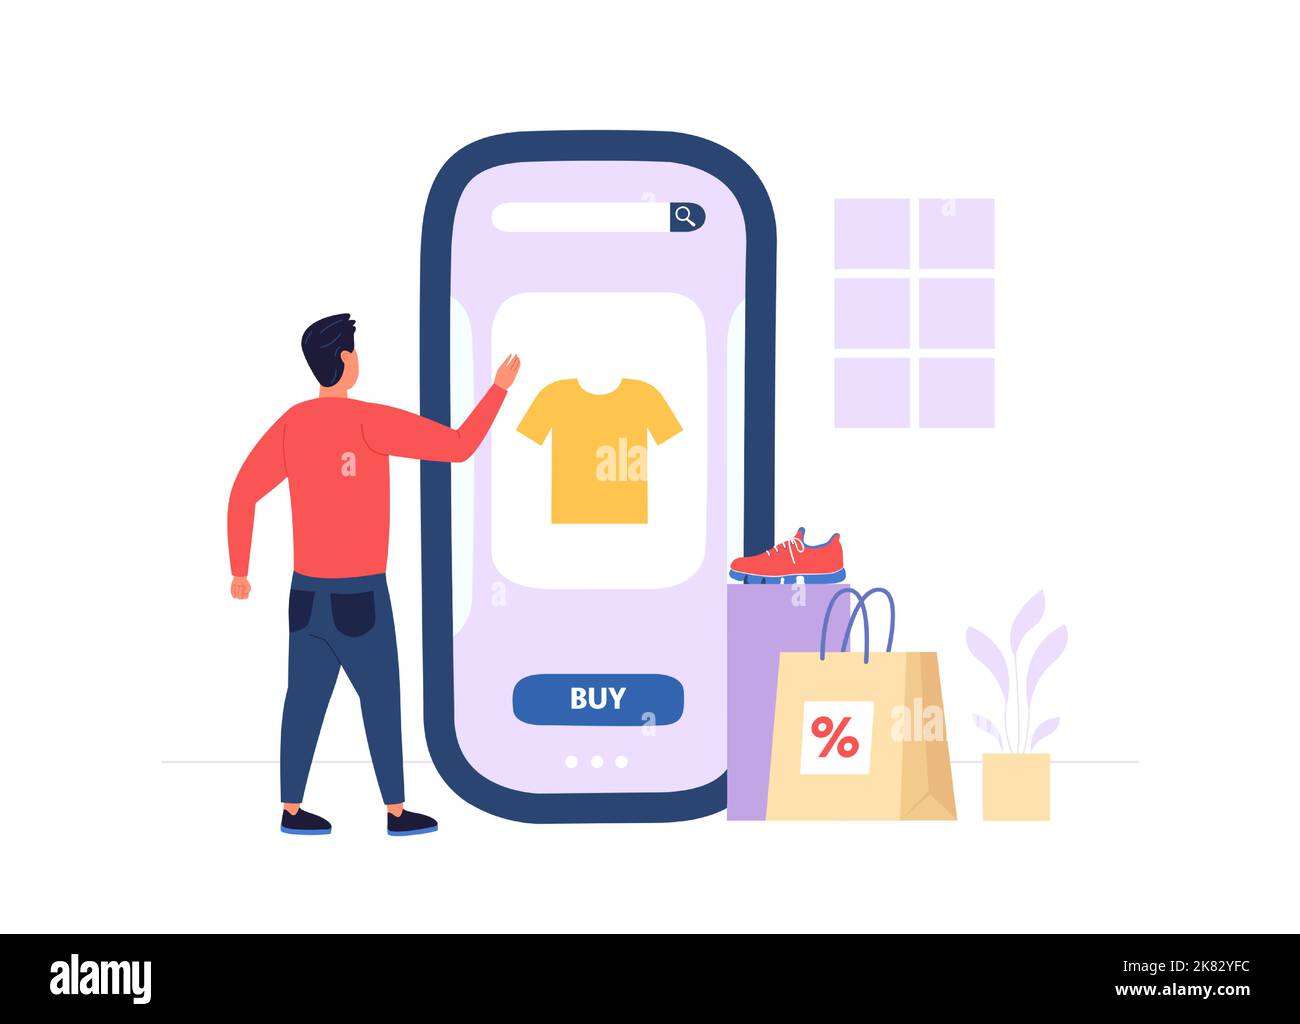 Online shopping. Male character choosing t-shirt on smartphone screen. Man doing digital payments with smartphone Stock Vector